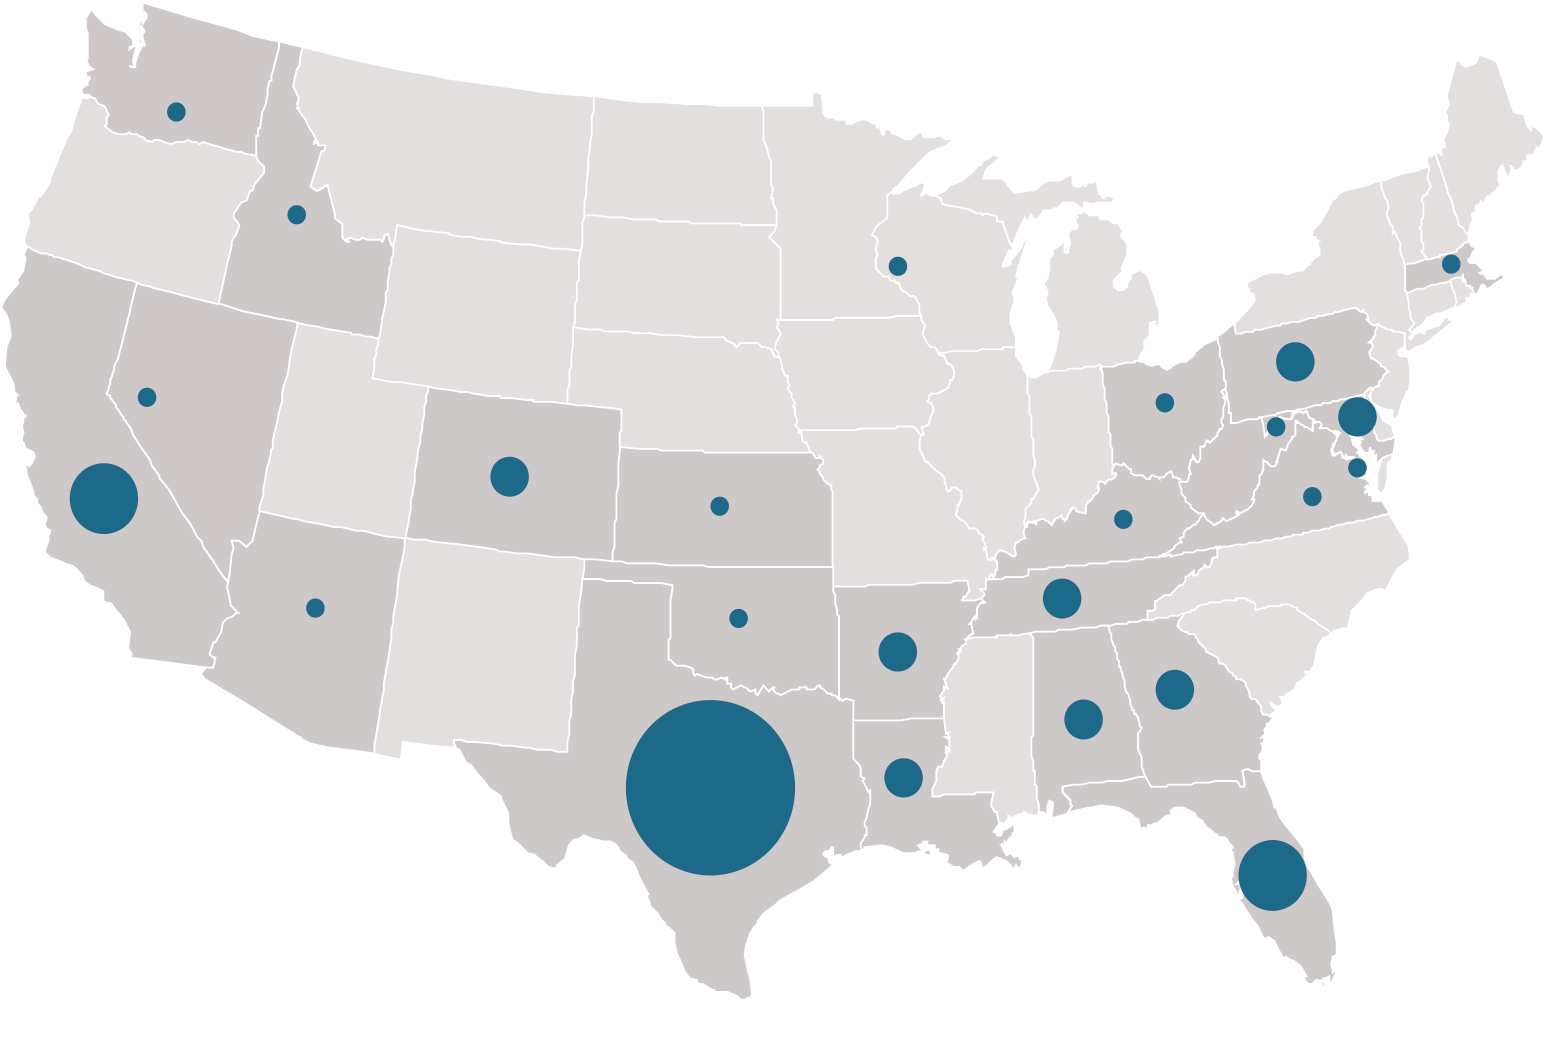 Map of the UTeach University Programs in the US